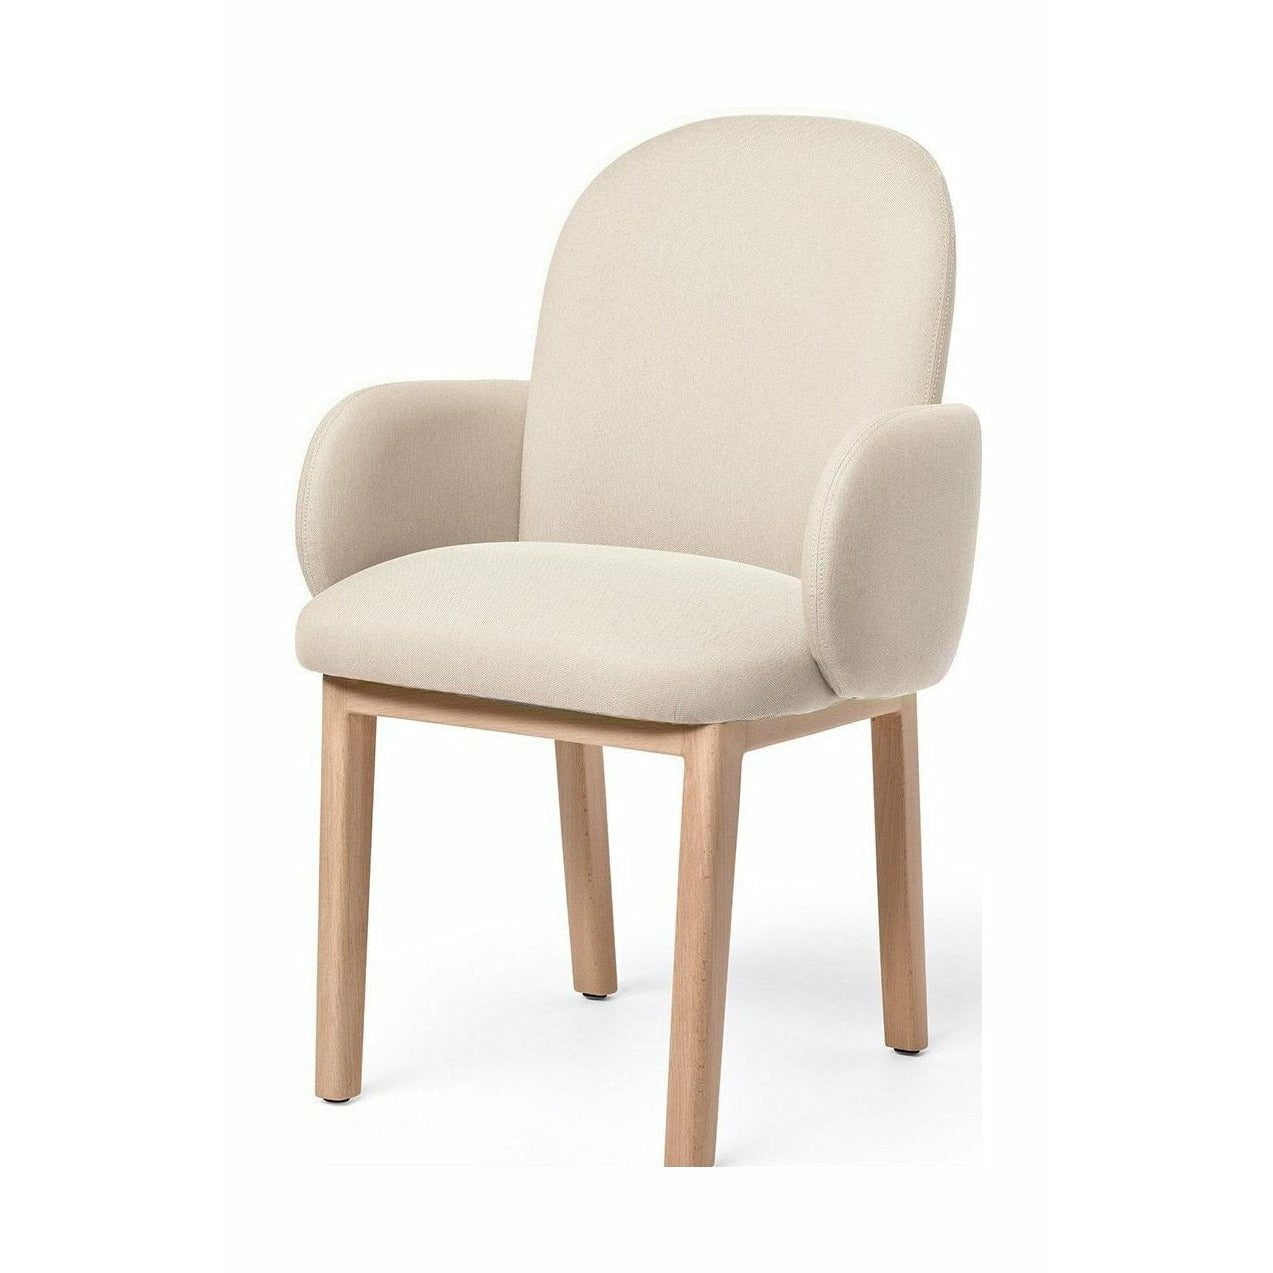 Puik Dost Dining Chair Wood, Cream